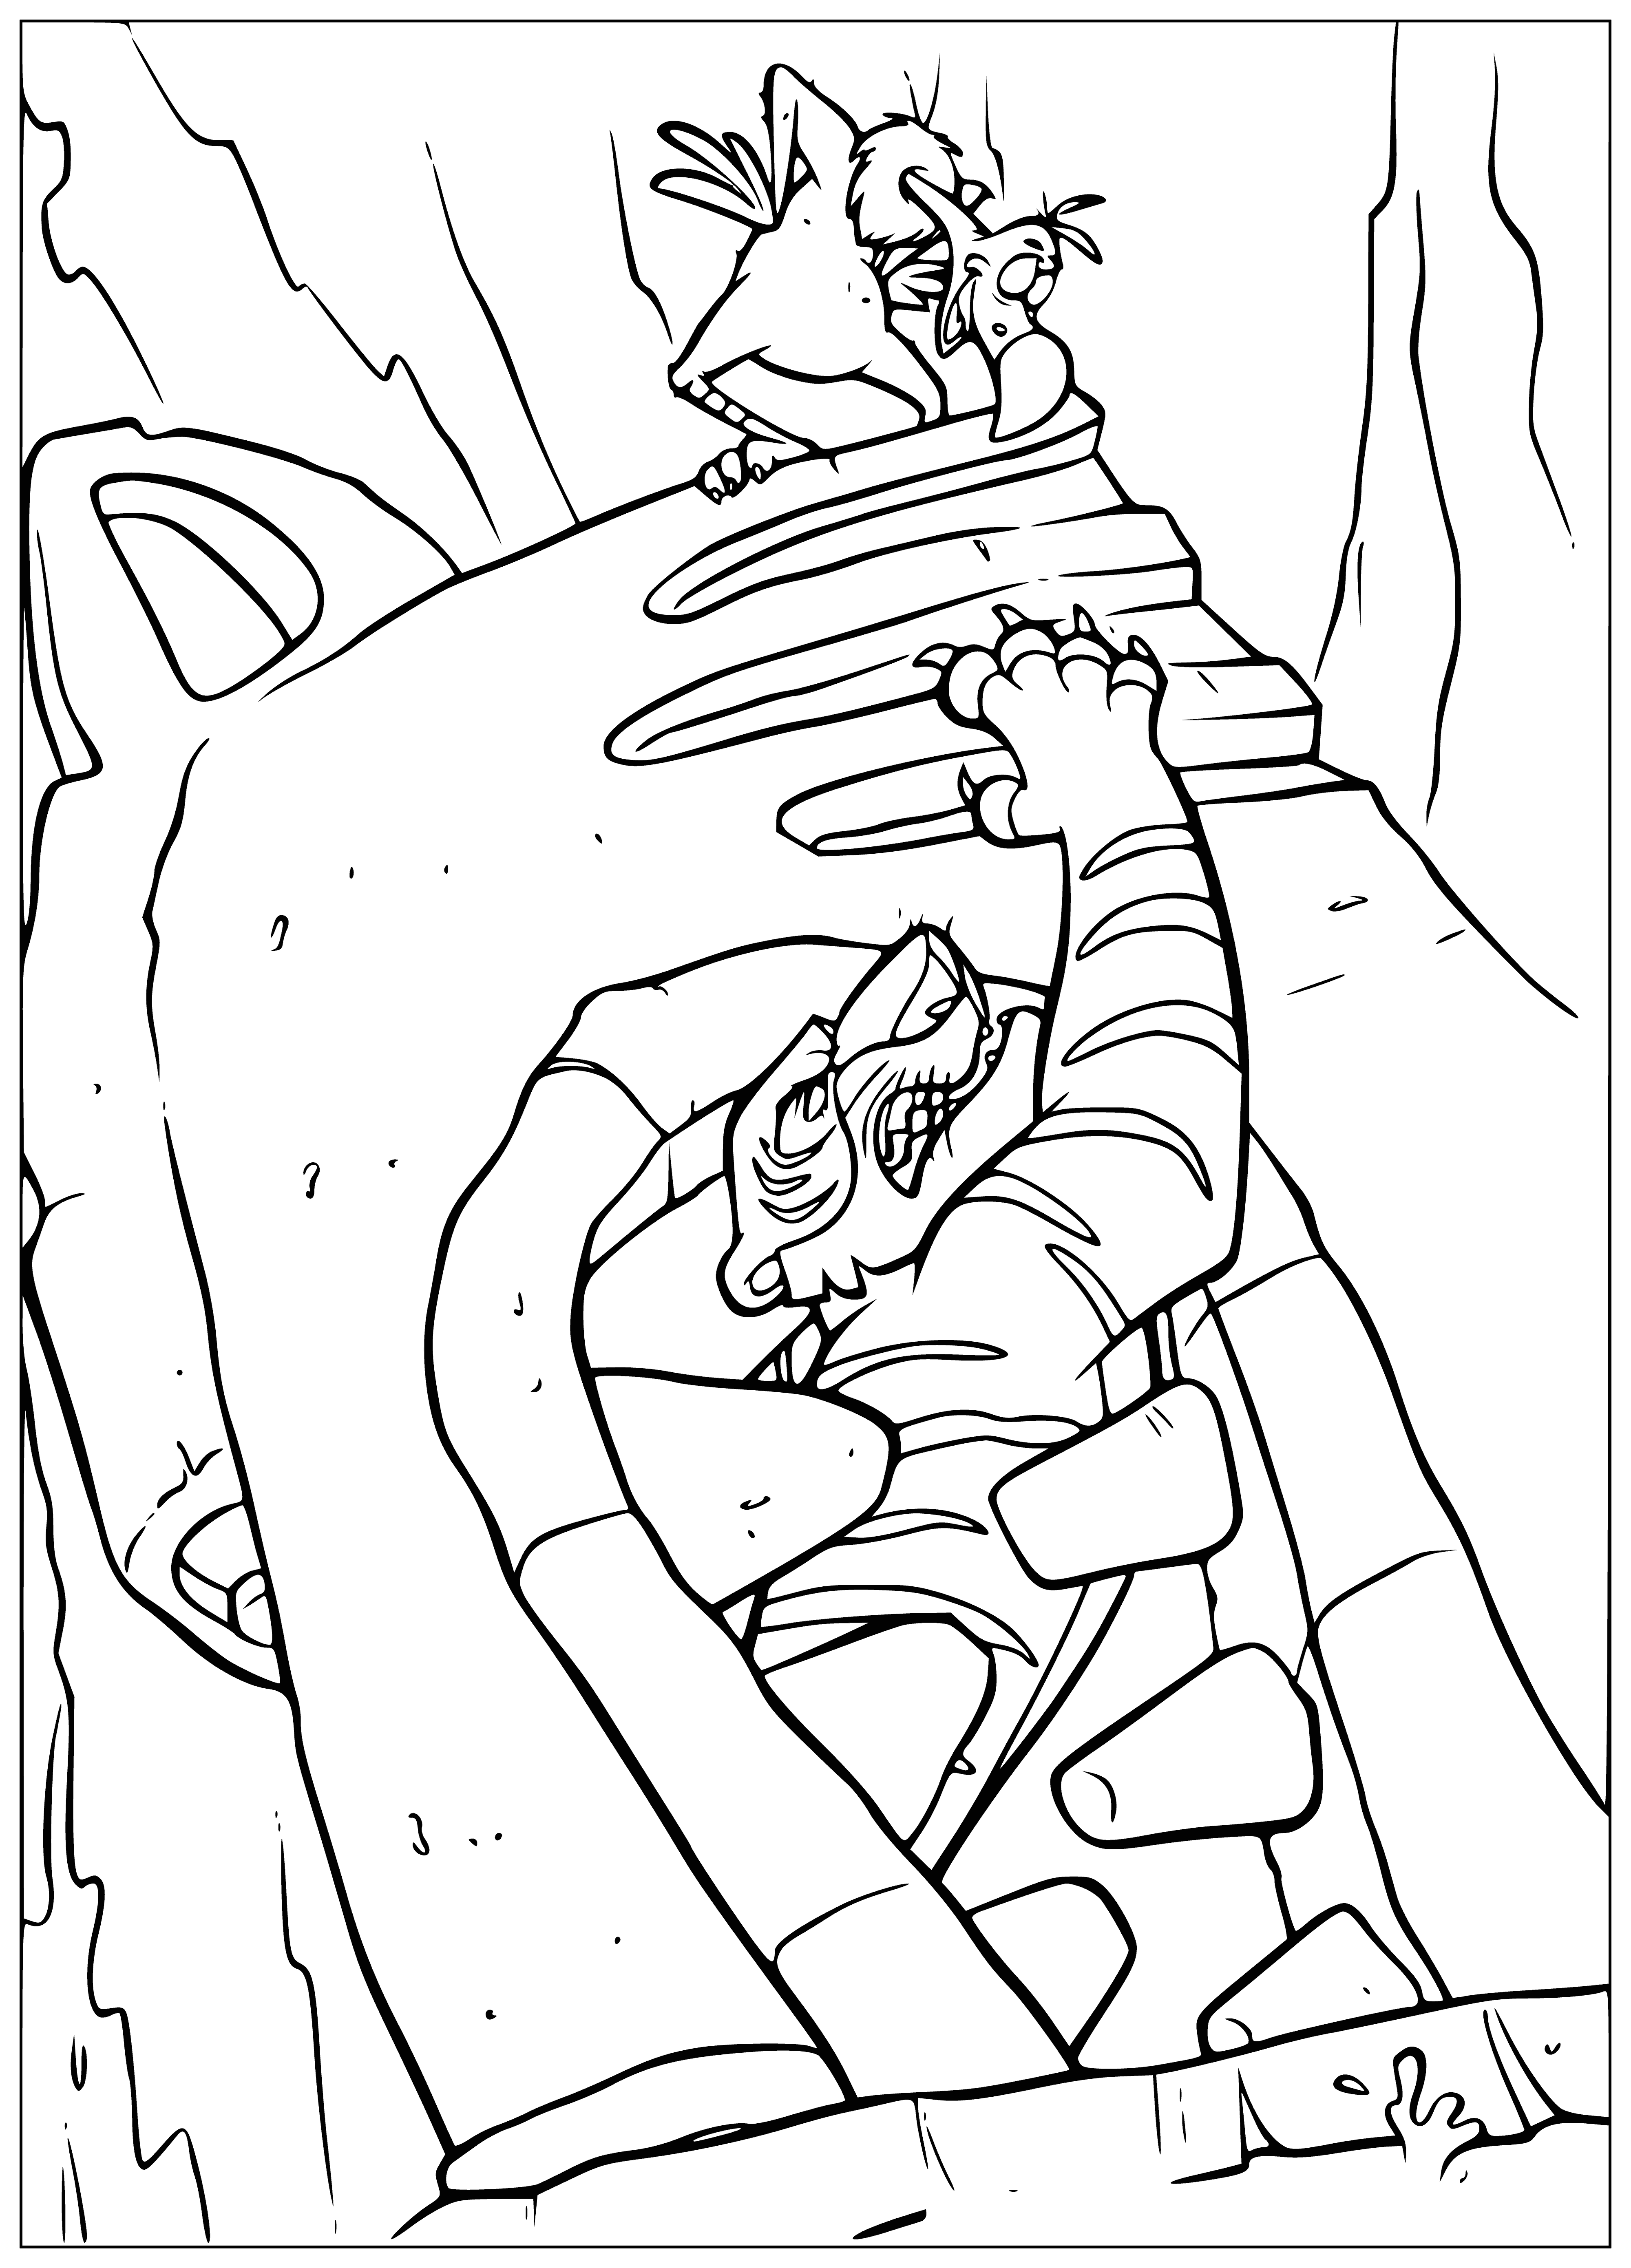 coloring page: Mowgli & friends swing in jungle, river below filled with crocodiles, distant temple ruin in sight.